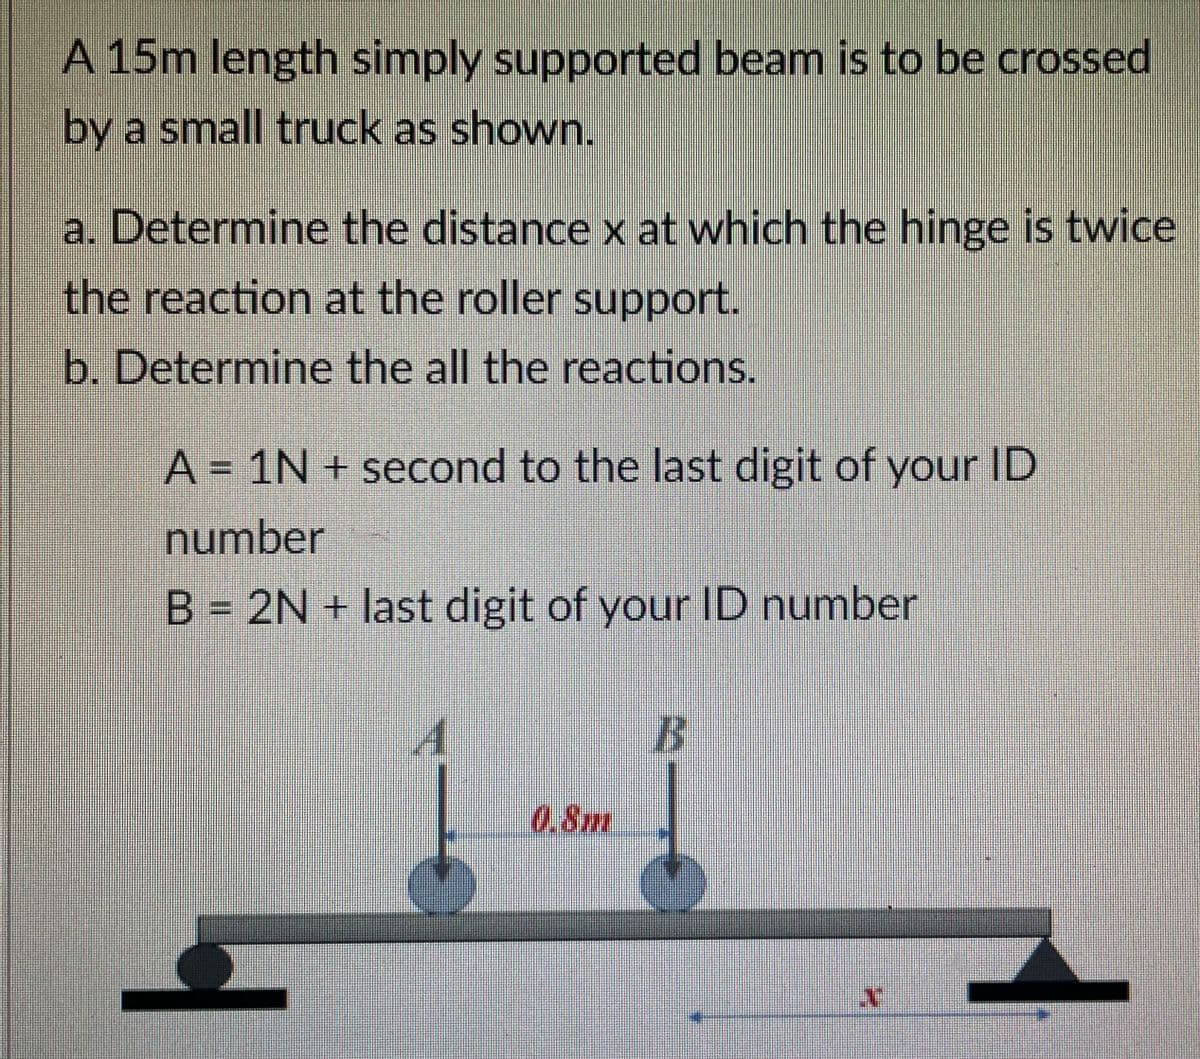 A 15m length simply supported beam is to be crossed
by a small truck as shown.
a. Determine the distance x at which the hinge is twice
the reaction at the roller support.
b. Determine the all the reactions.
A = 1N + second to the last digit of your ID
number
B = 2N + last digit of your ID number
0.8m
